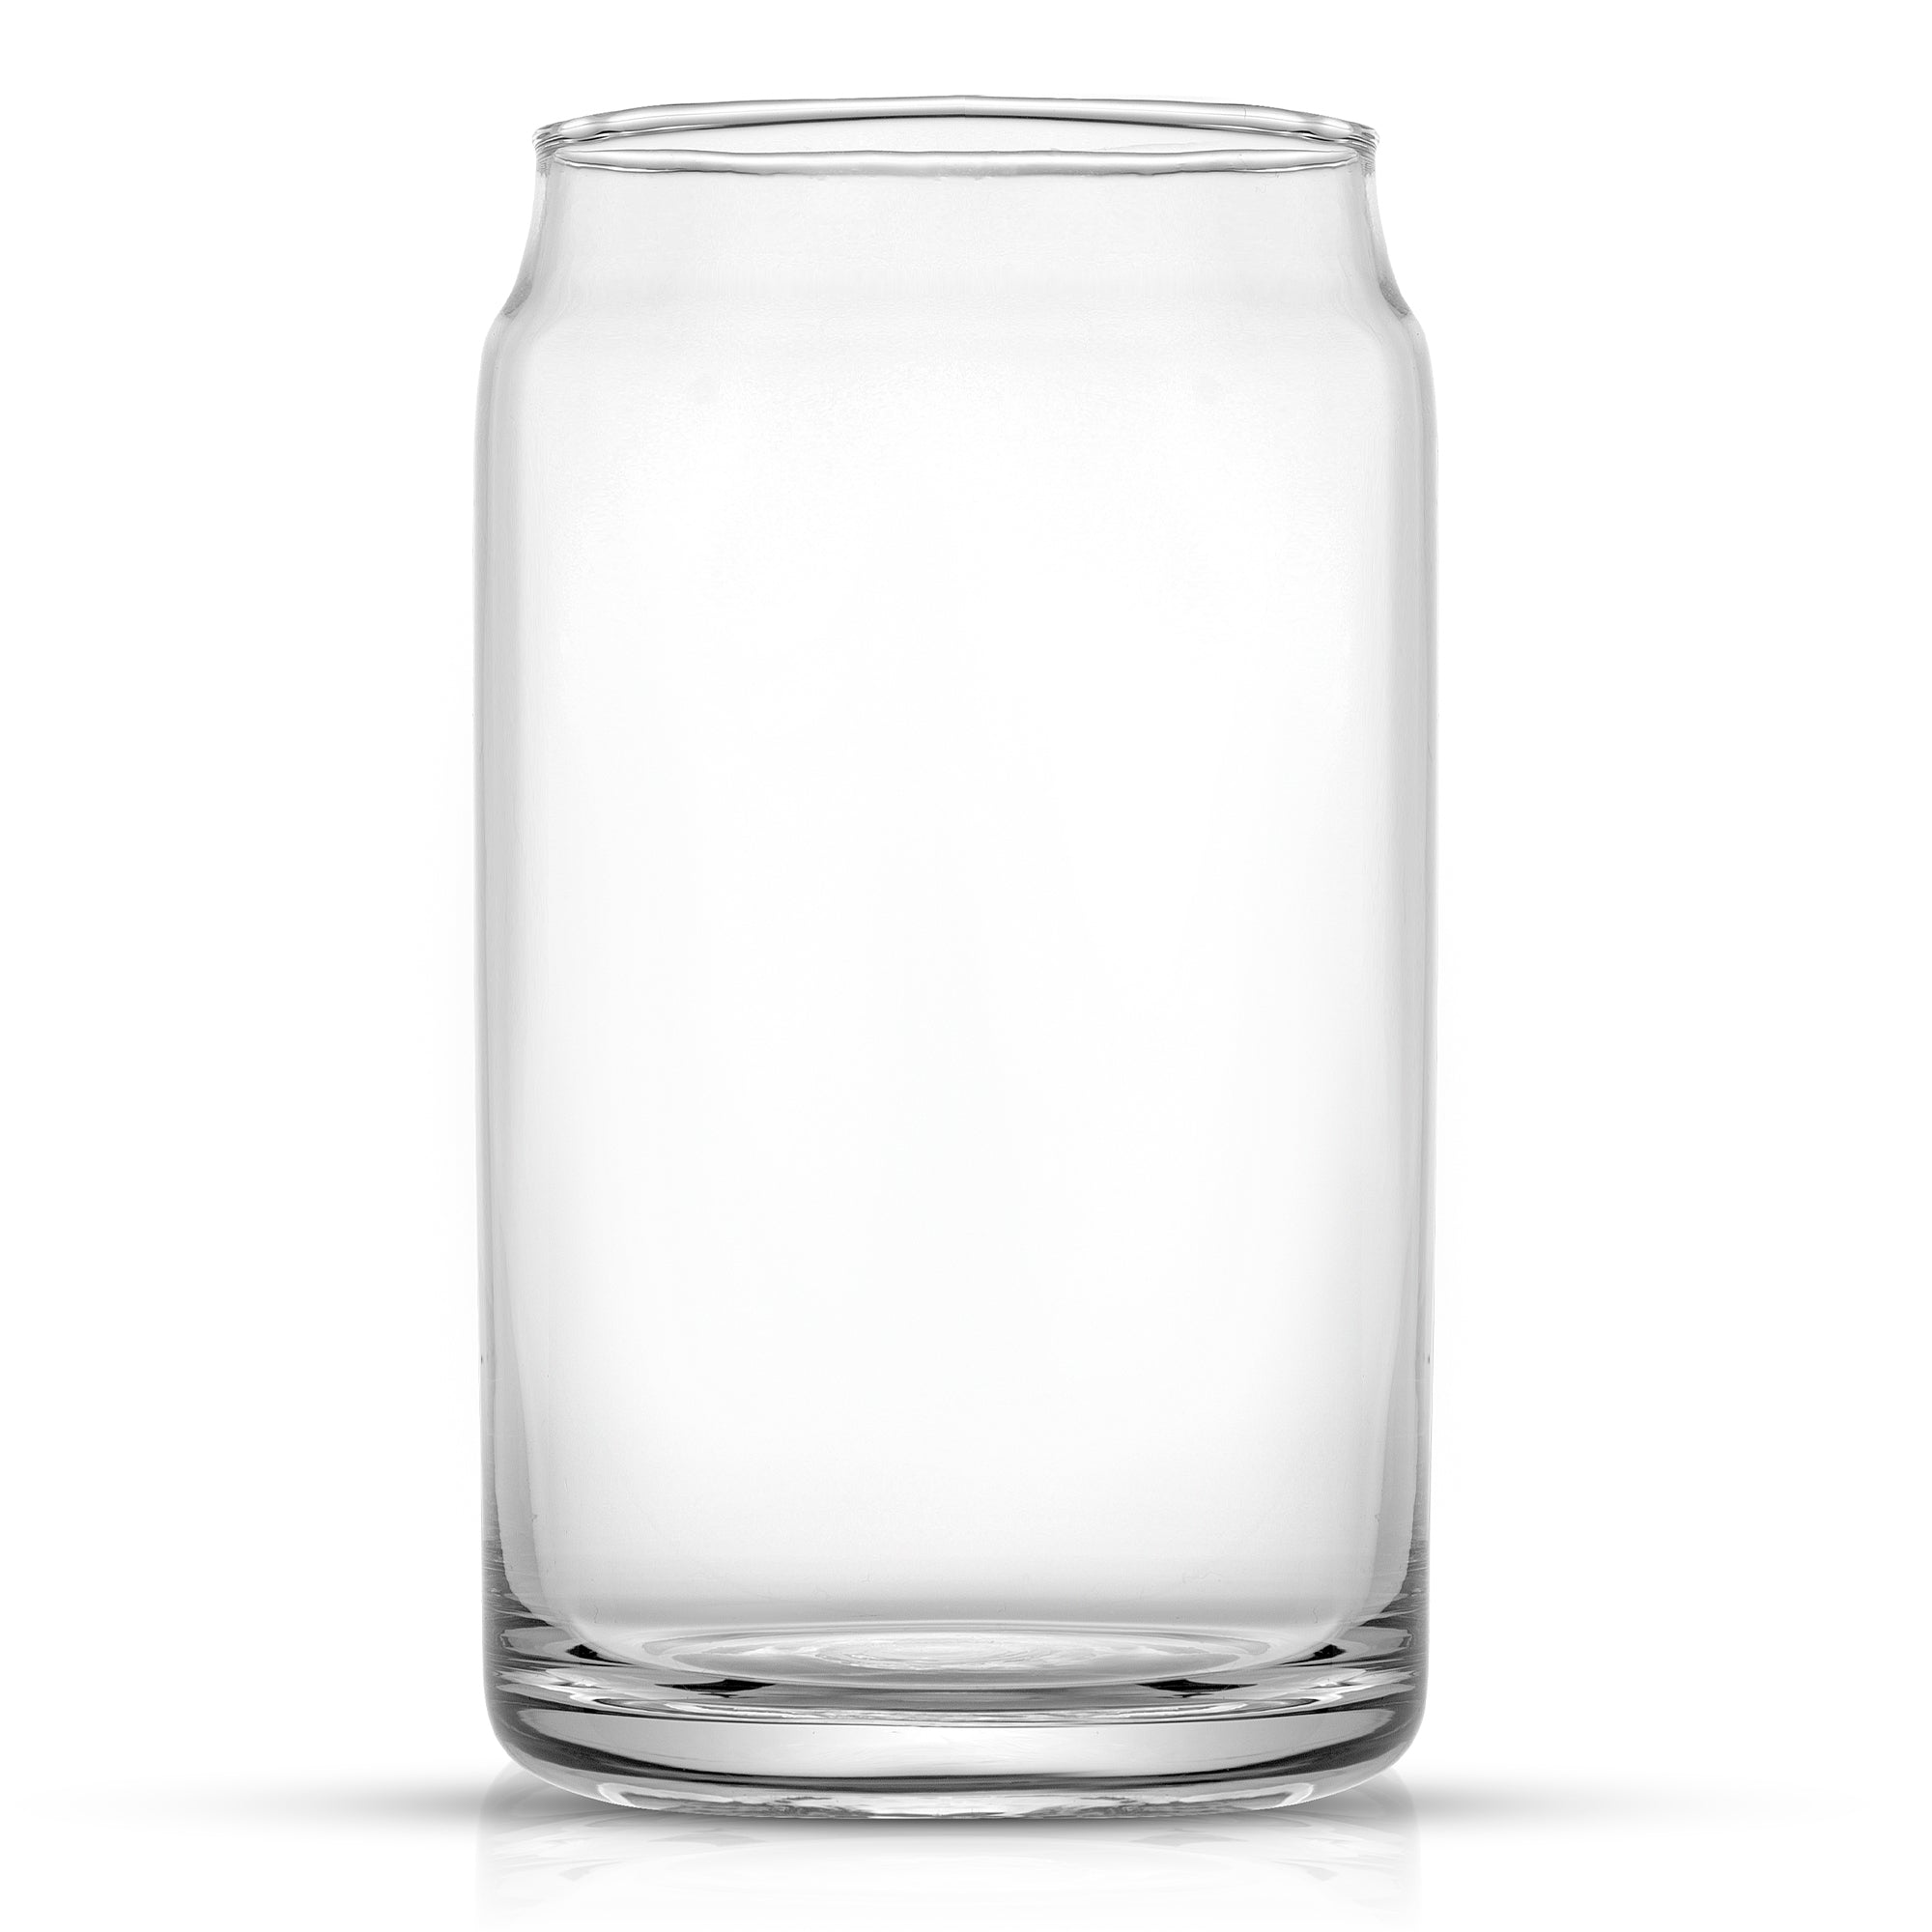 A clear glass cup shaped like a classic beverage can sits on a white background. These are JoyJolt Classic Can Shape Tumbler Drinking Glass Cups.